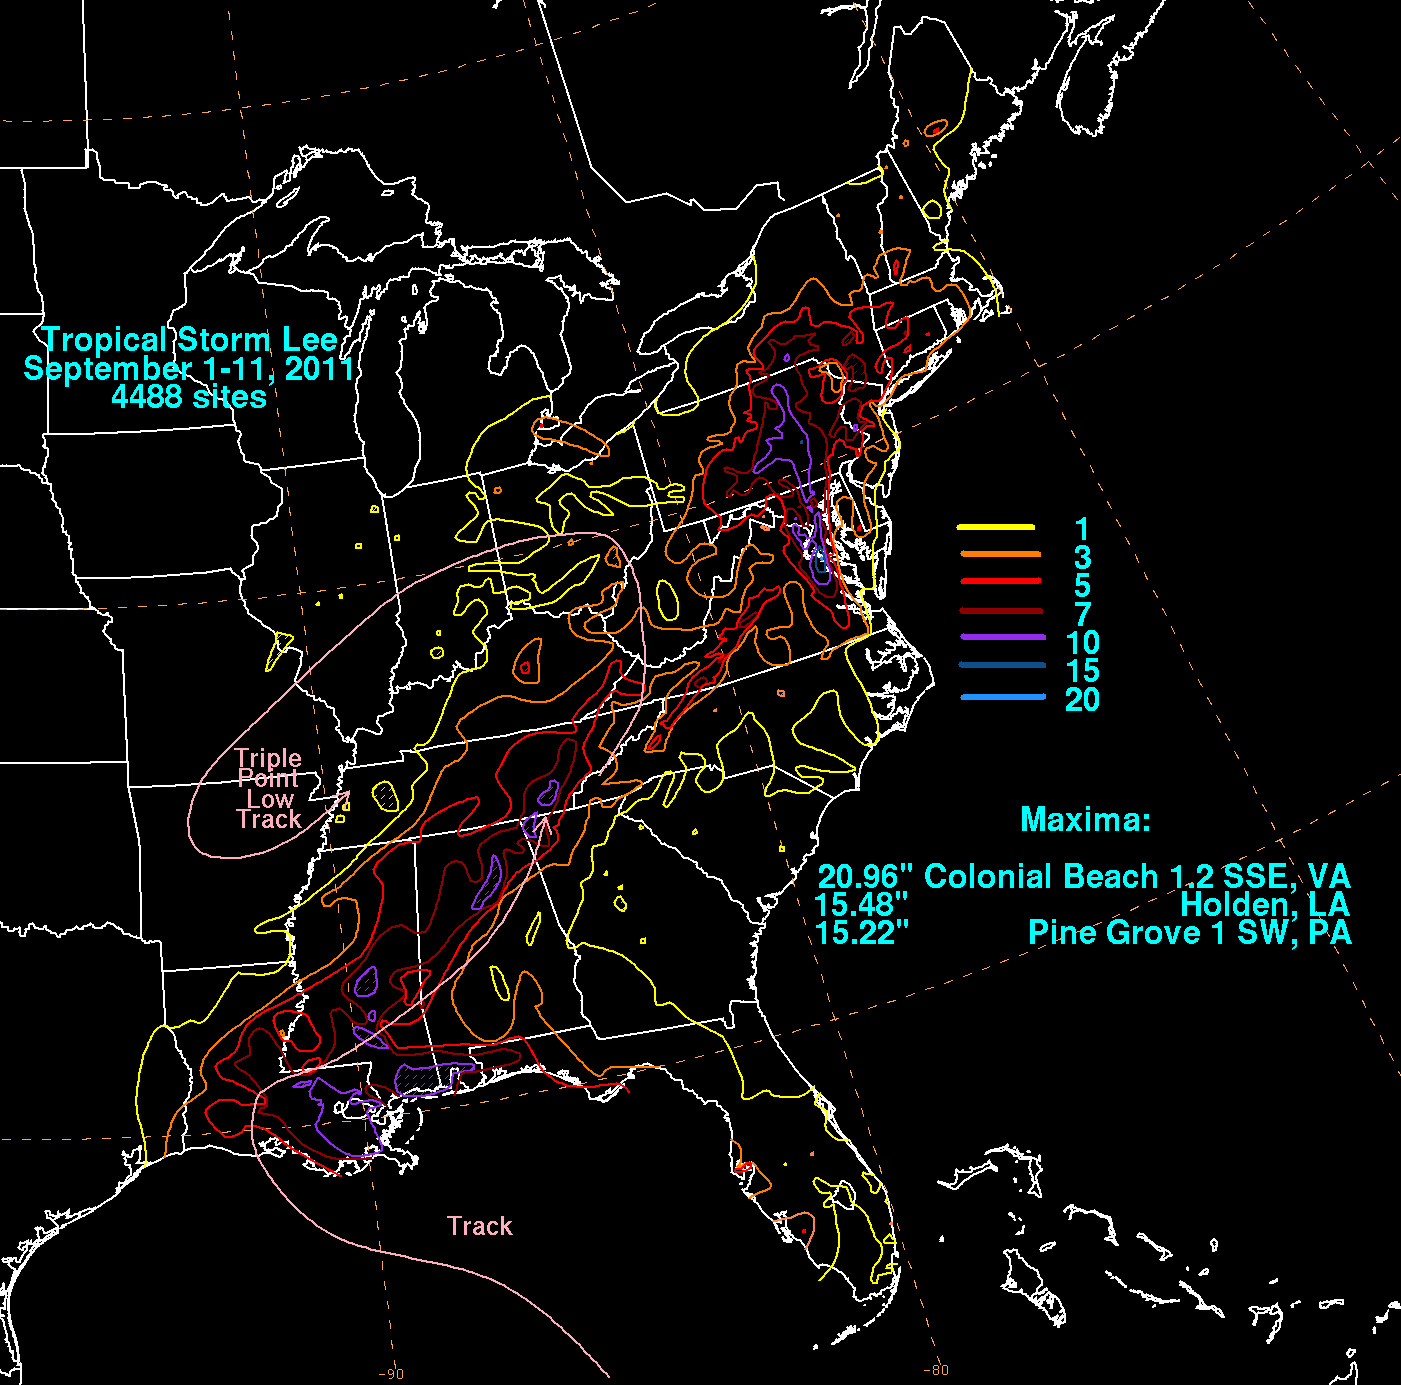 Storm Total Rainfall for Tropical Storm Lee (2011)